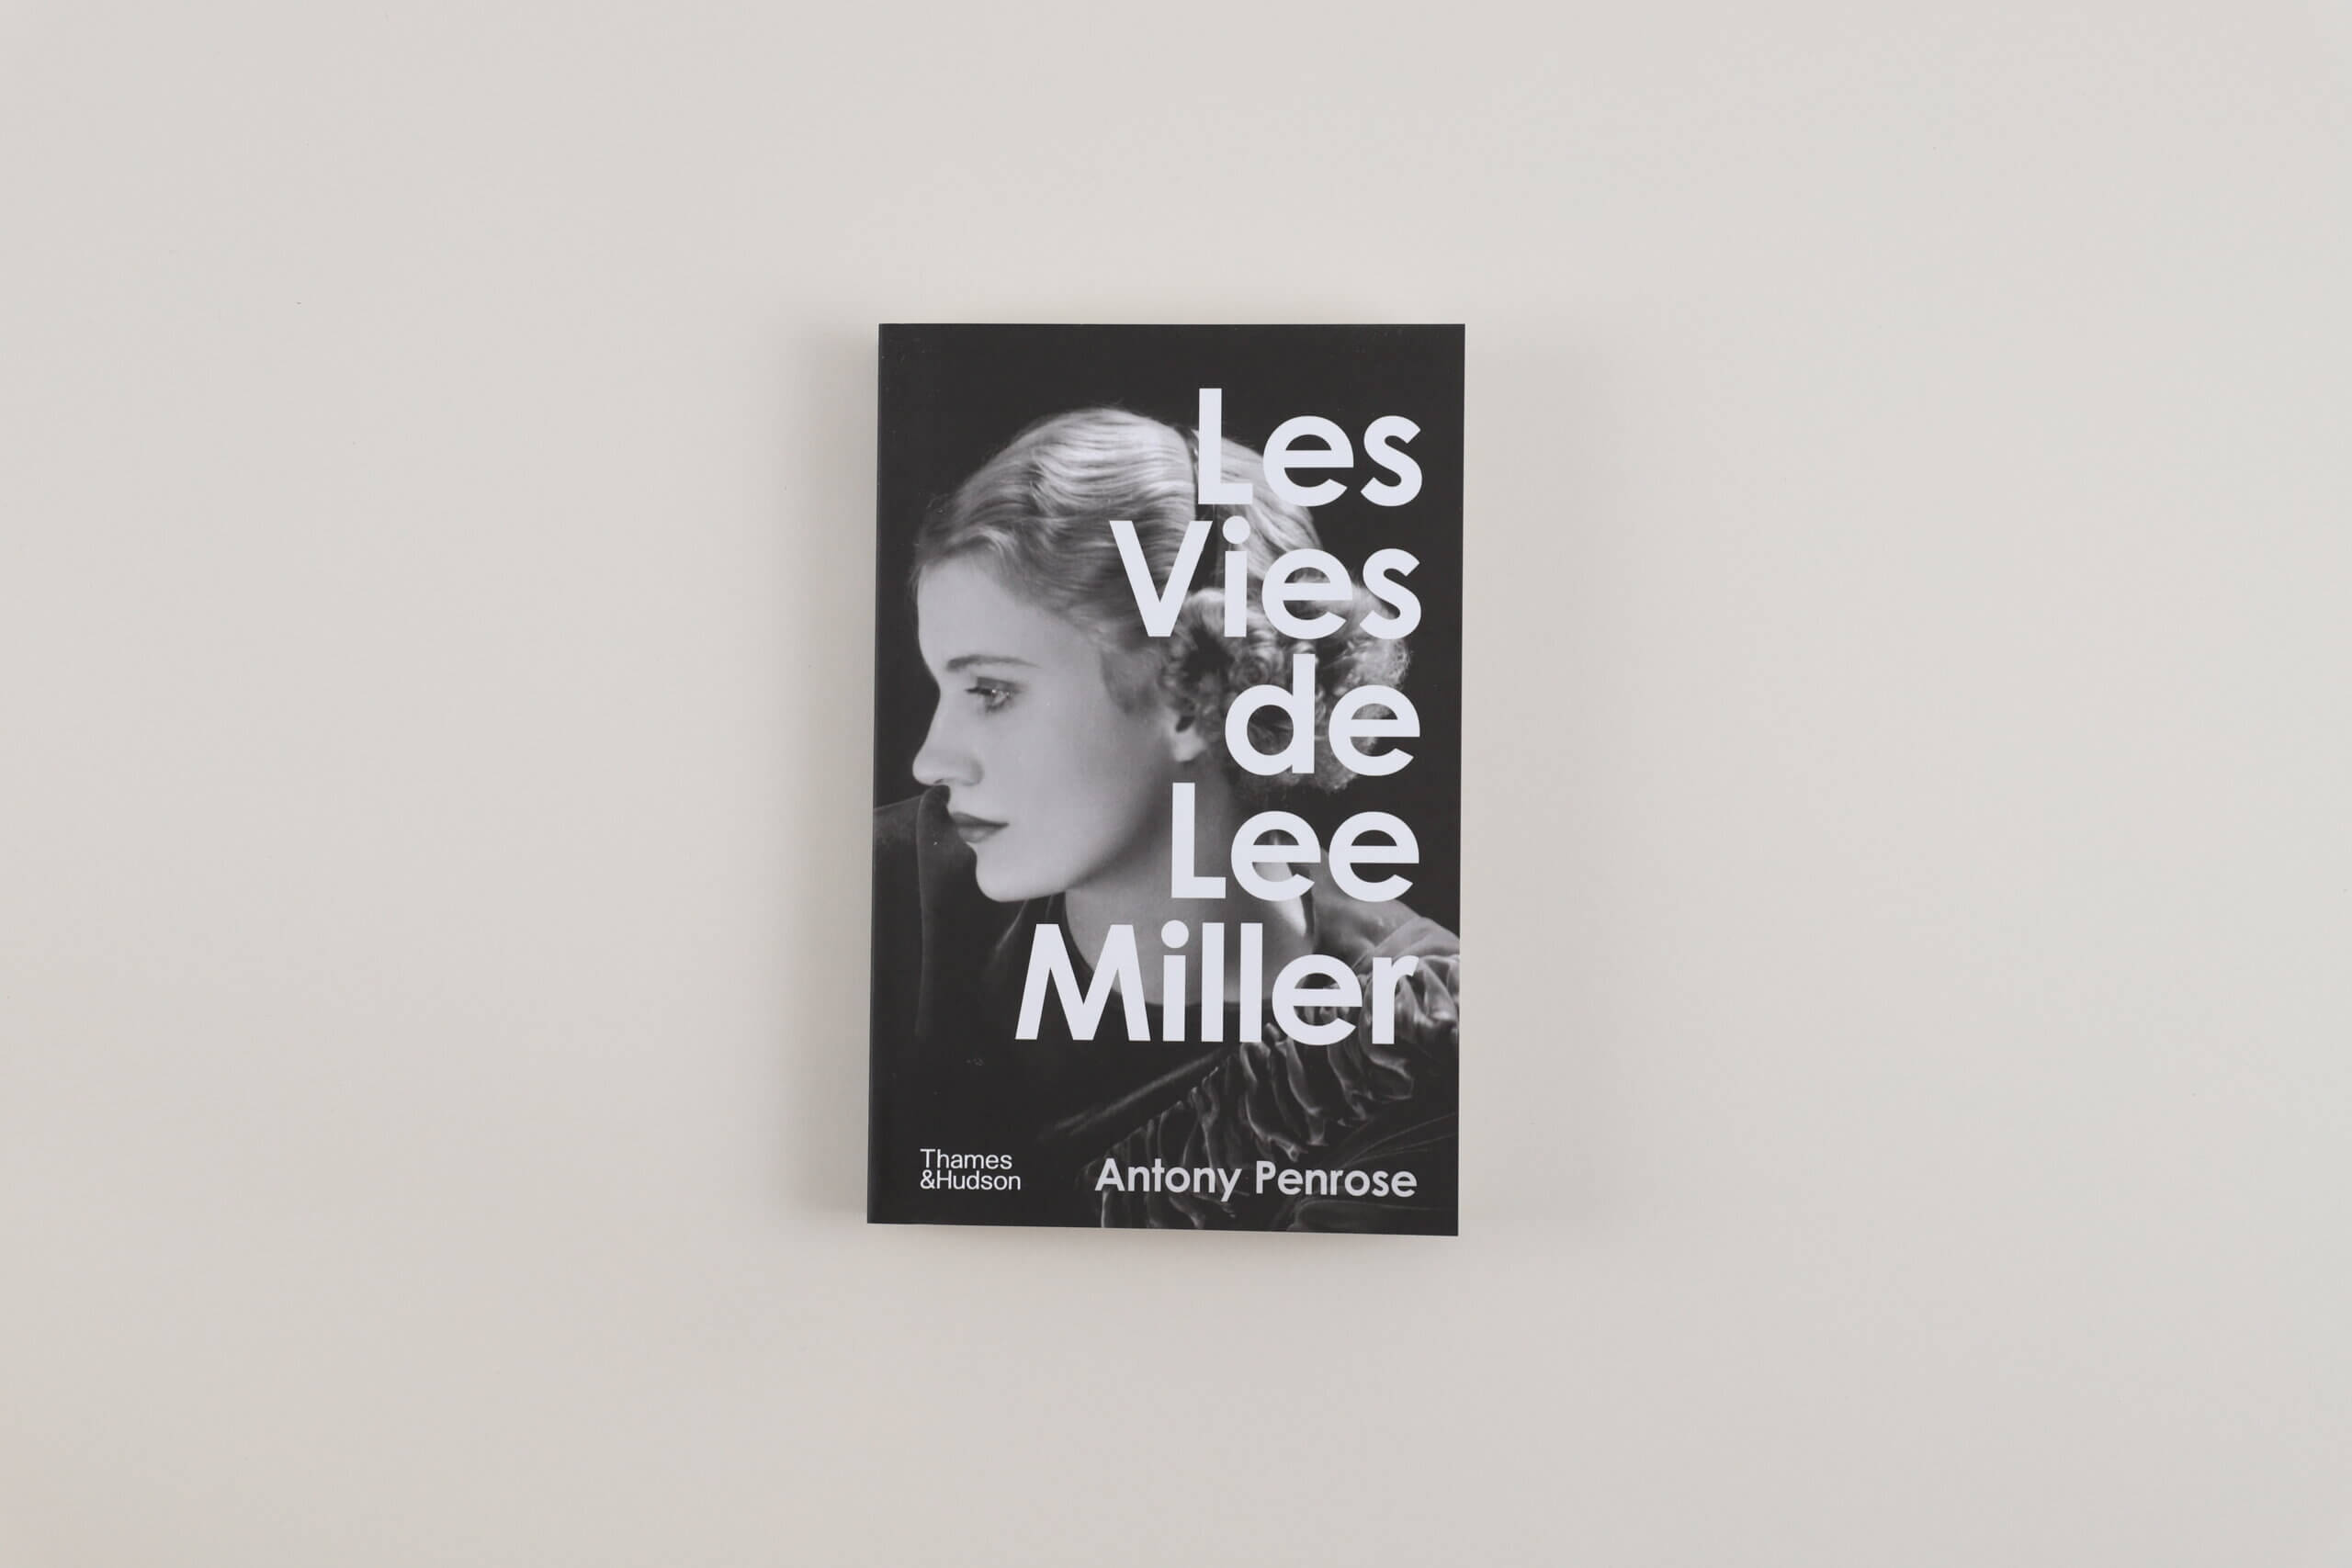 lesviesde-lee-miller-cover